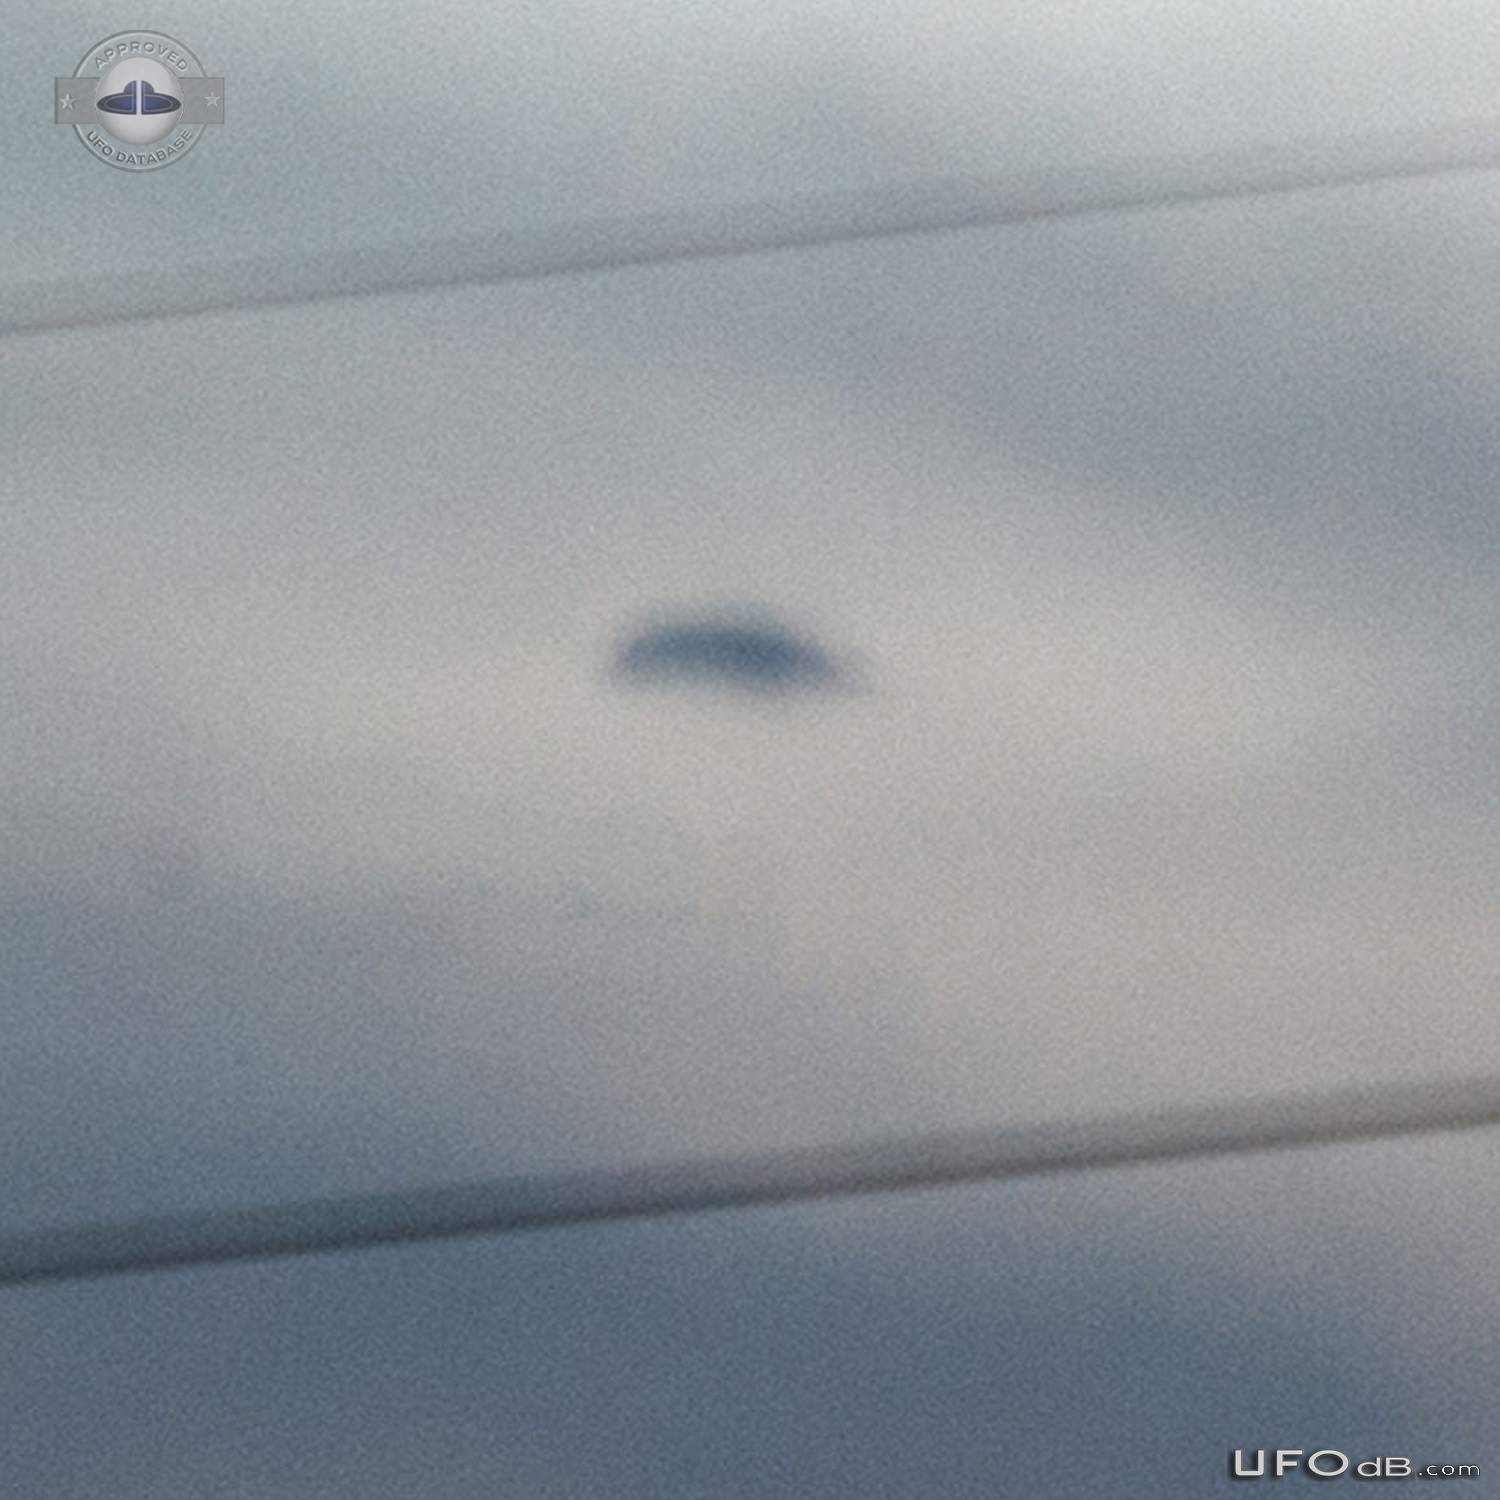 Hovering disc UFO moved then disappeared in the clouds Brisbane Queens UFO Picture #776-4